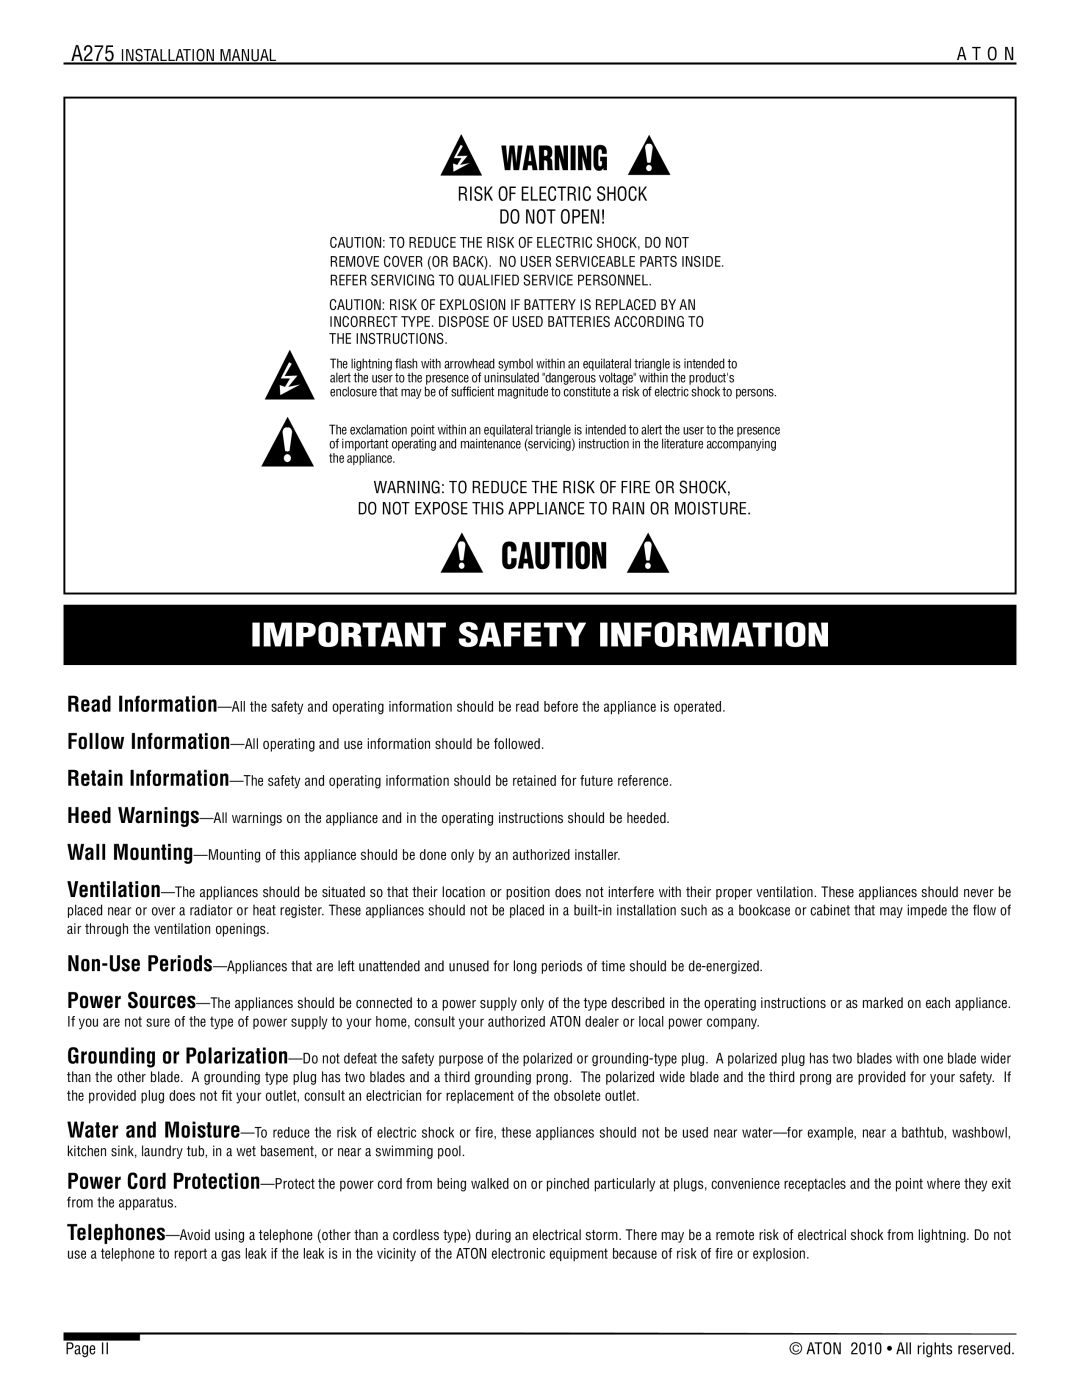 ATON A275 installation manual Important Safety Information, Risk Of Electric Shock Do Not Open 